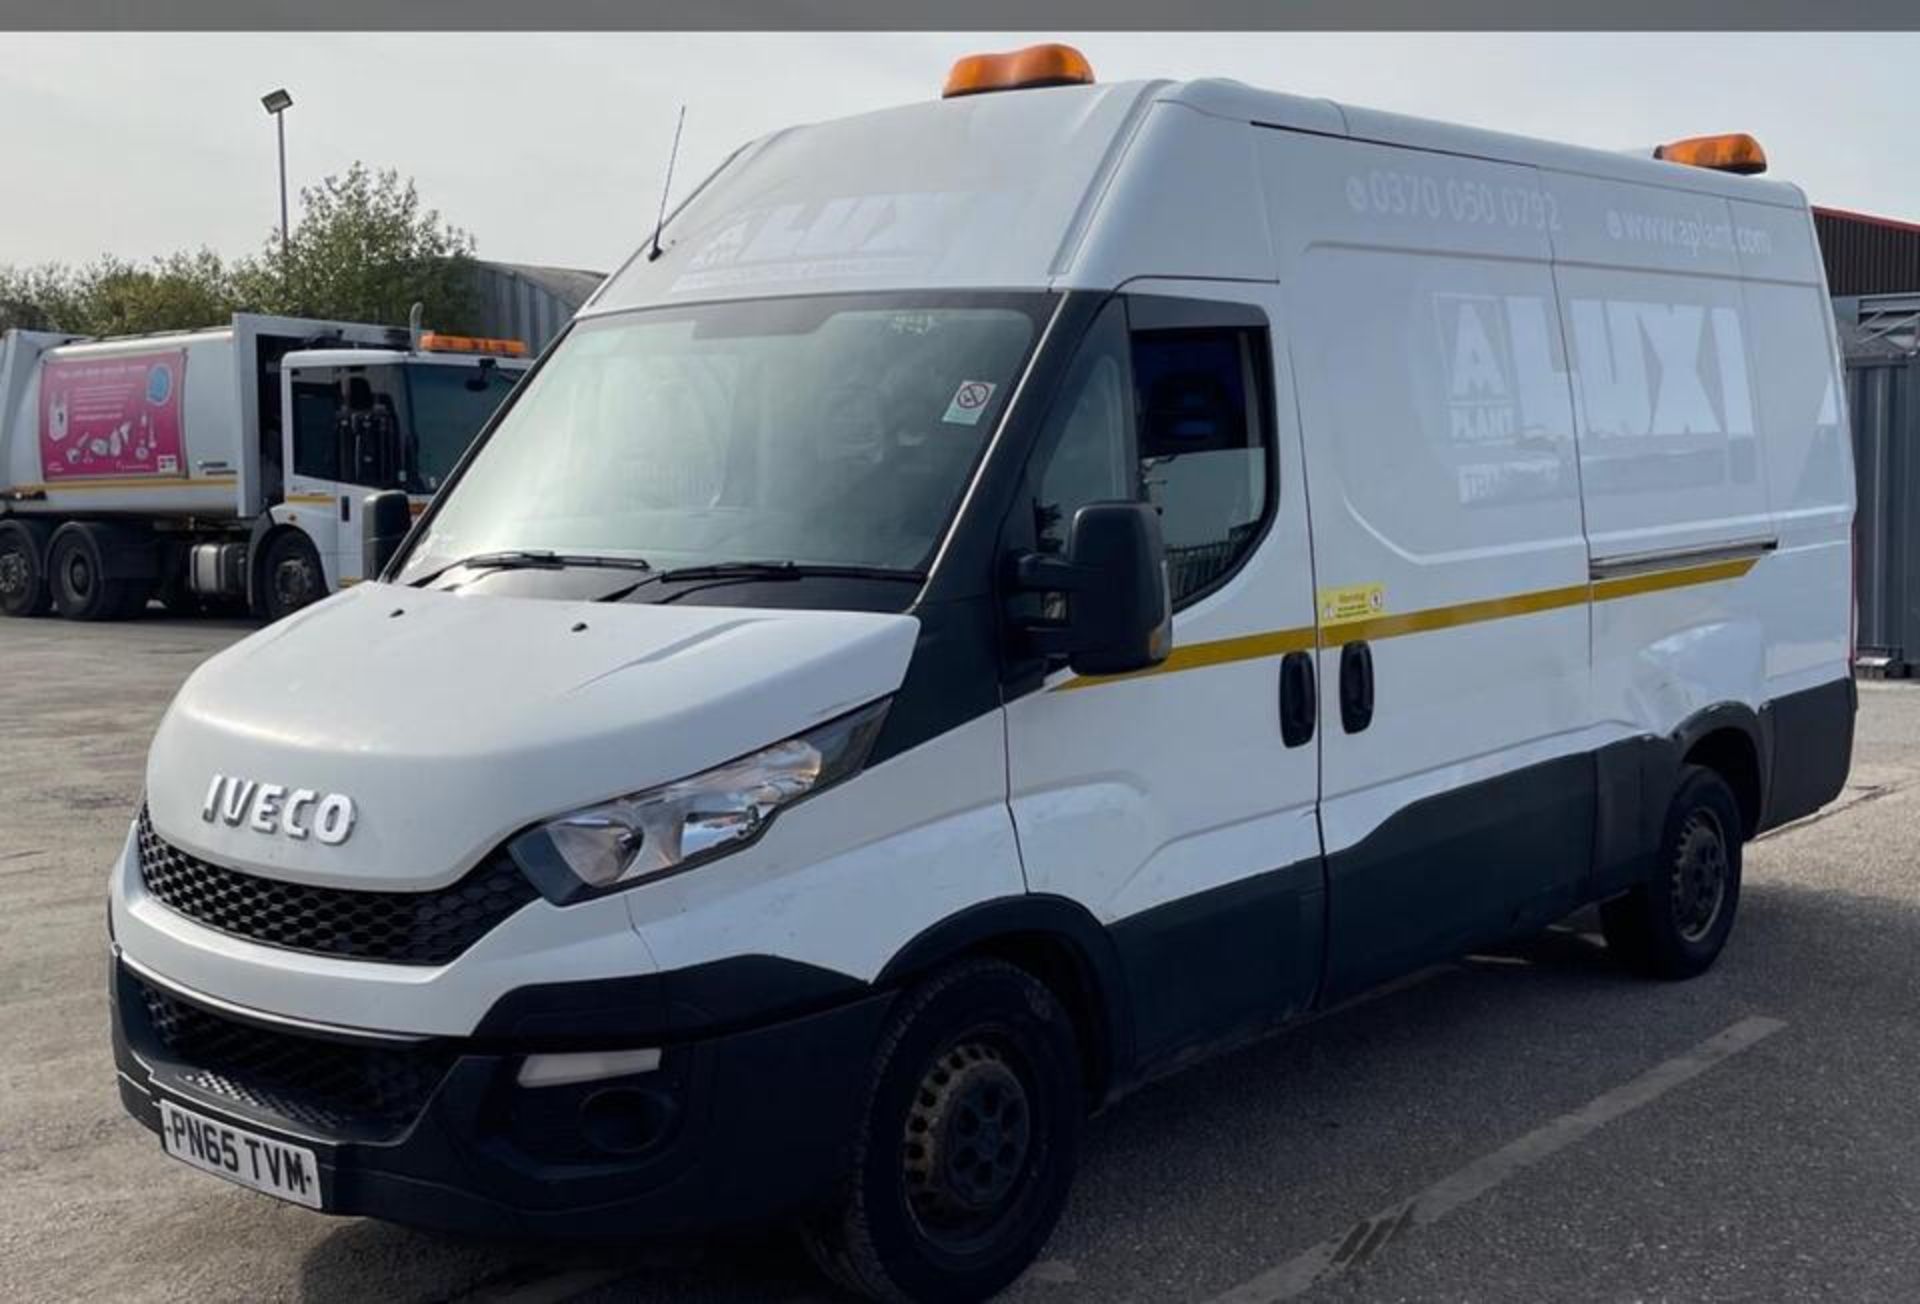 2015 IVECO DAILY-115K MILES-HPI CLEAR -READY TO GO! - Bild 11 aus 12